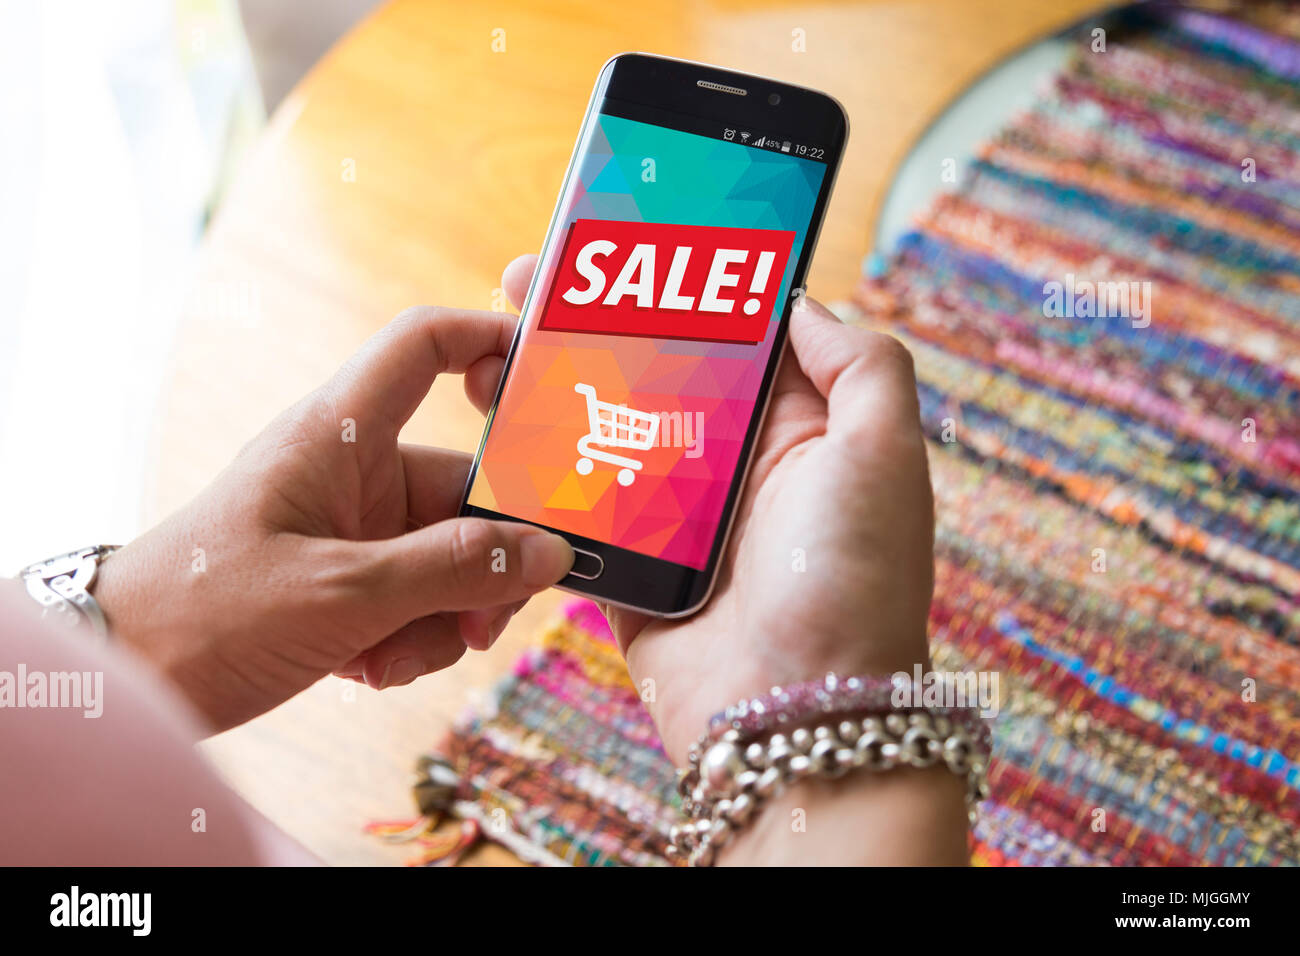 Girl holding a smartphone a sale advertising on the screen. Marketing, discount, internet, cell phone publicity. Stock Photo